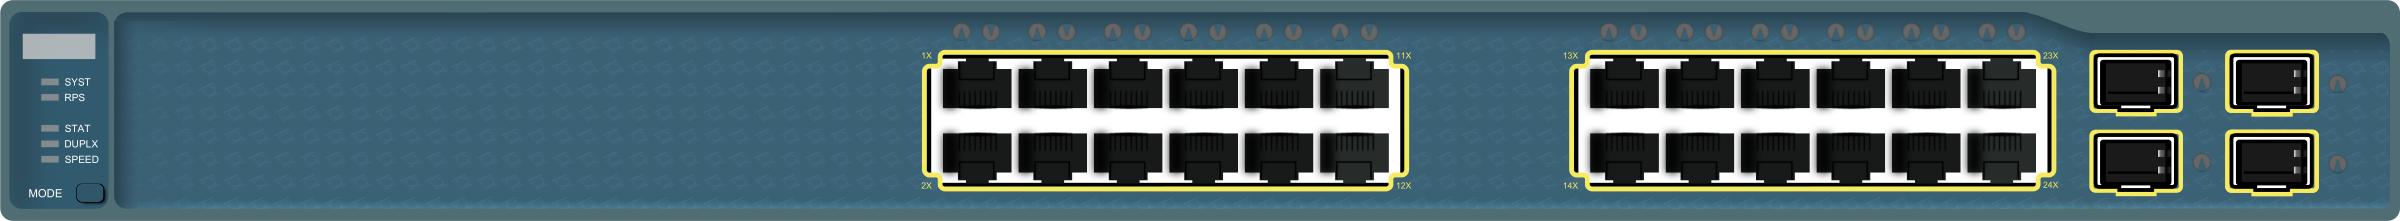 Gigabit Layer 3 Switch #4 PNG icons